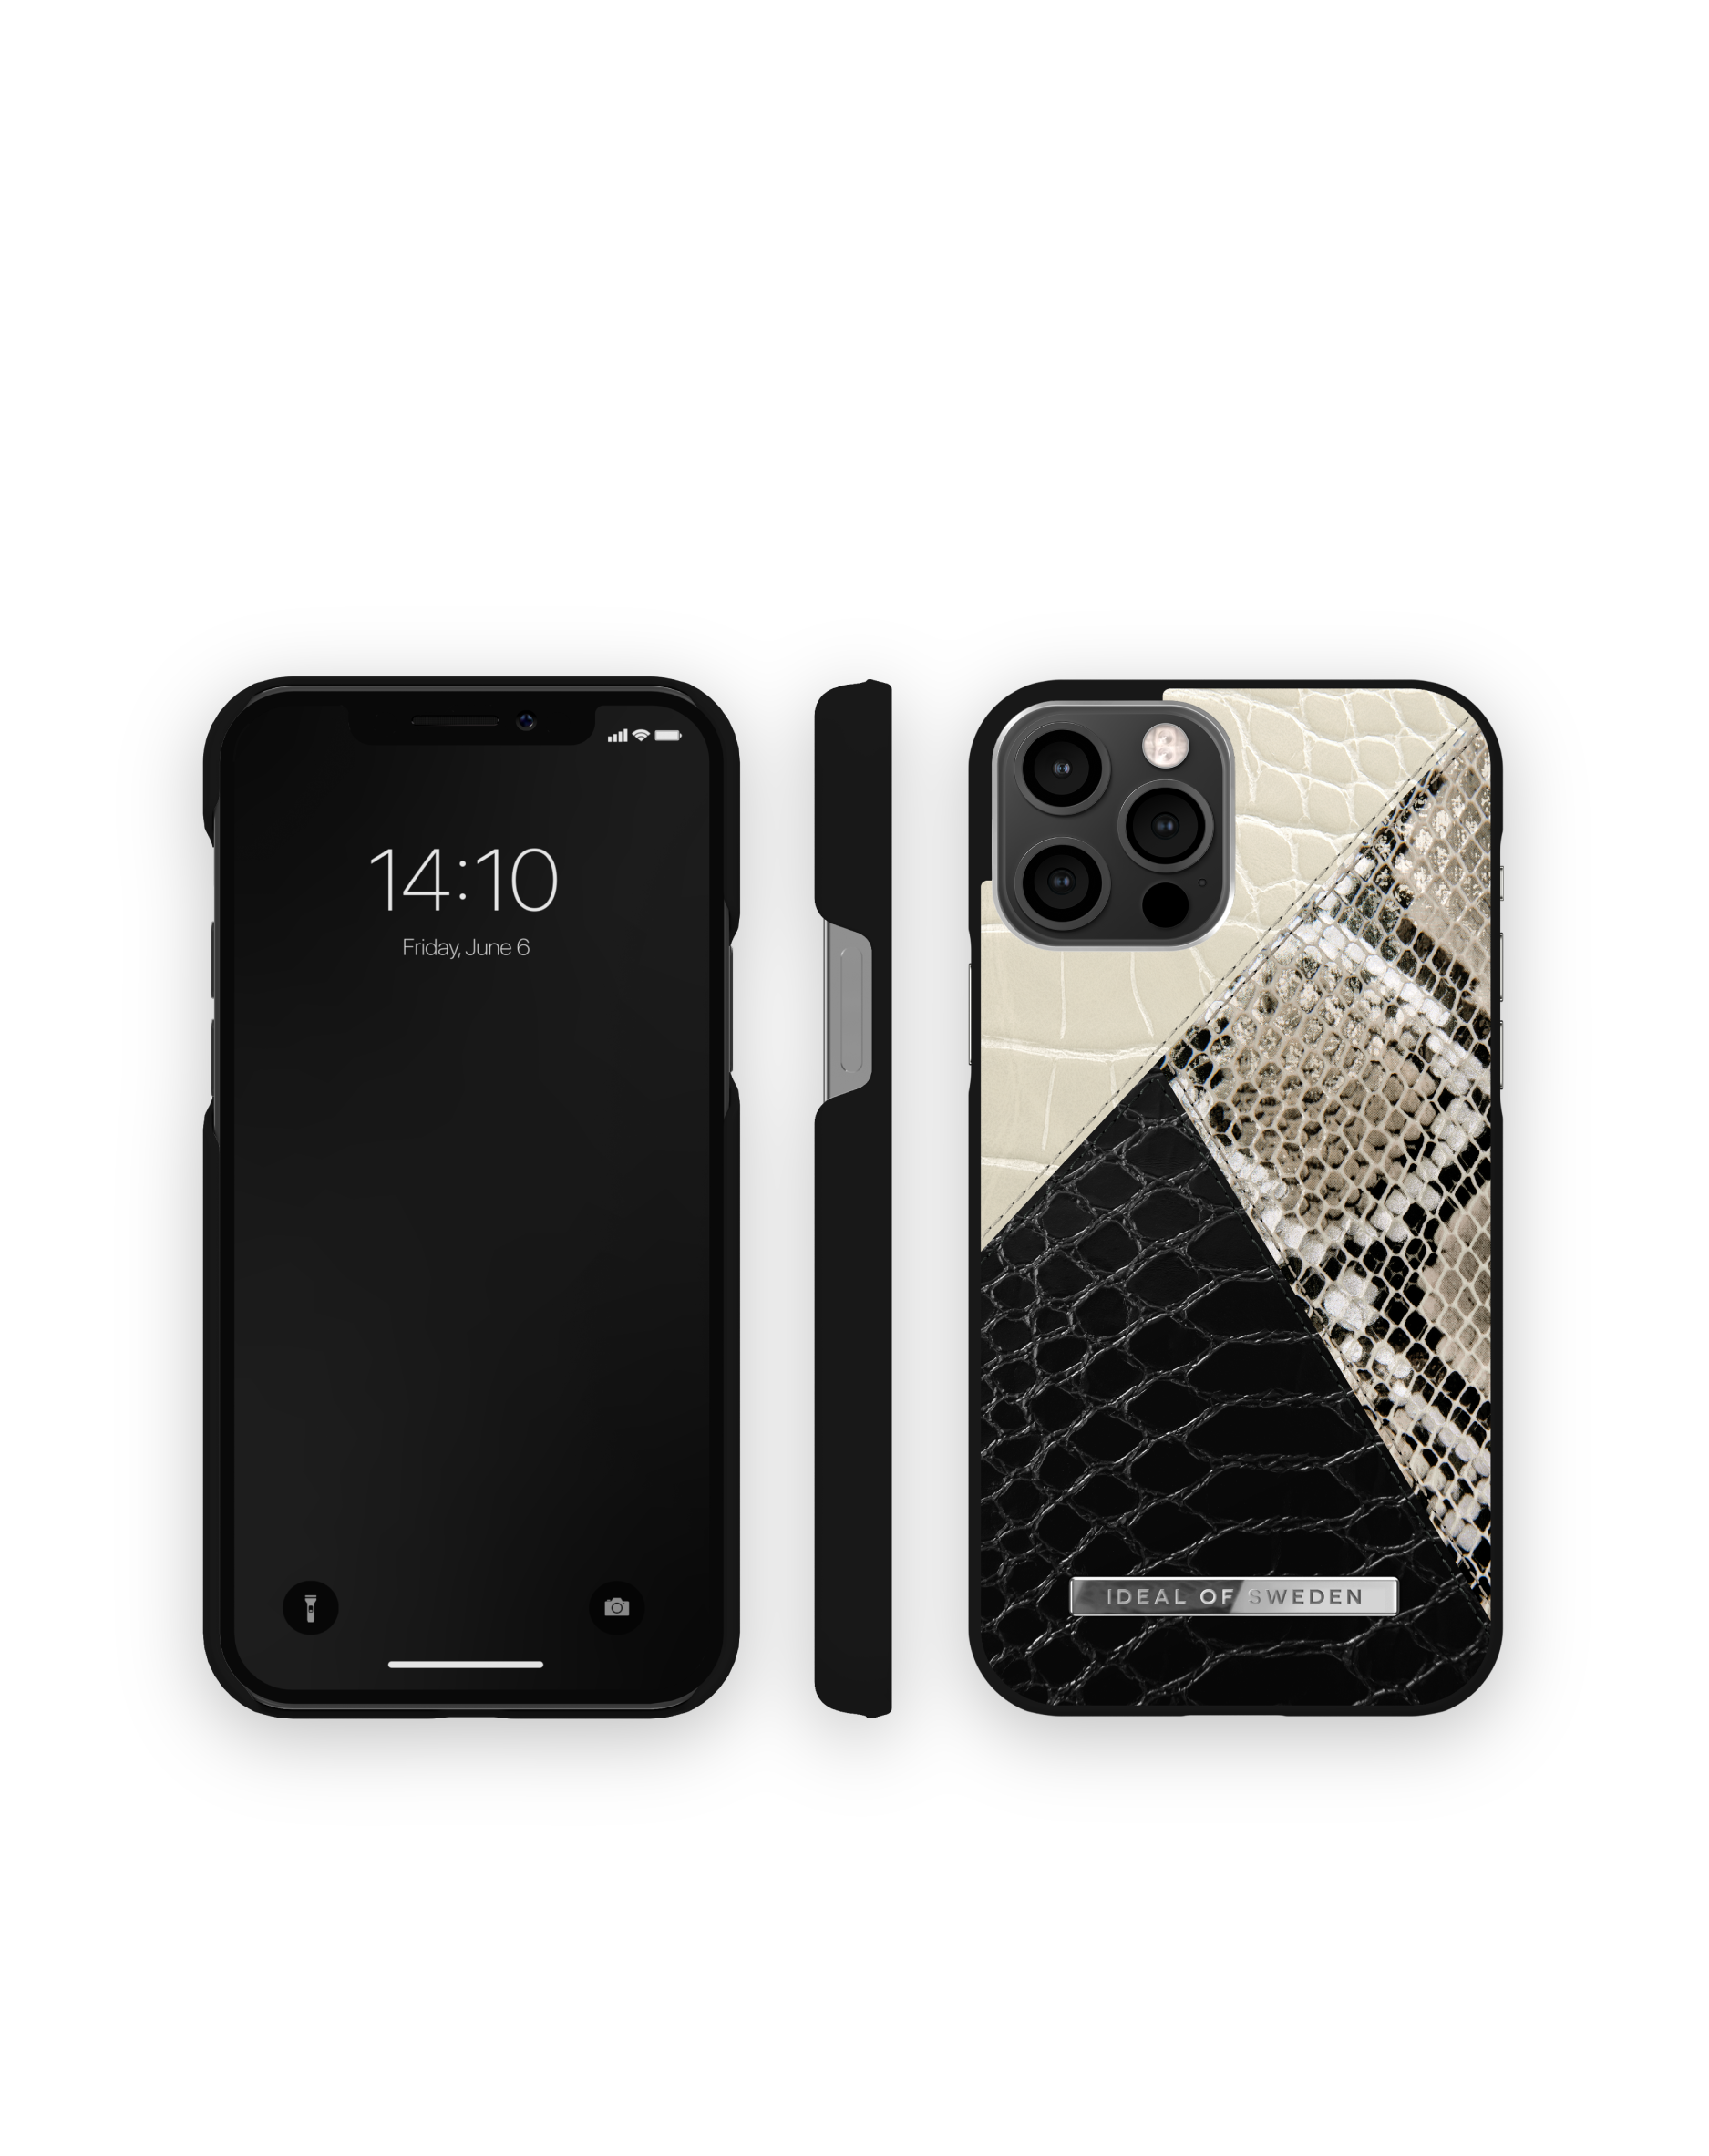 IDEAL OF SWEDEN IDACSS21-I2061-271, Apple Apple 12, 12 Snake Backcover, Pro, Night iPhone Sky Apple, iPhone